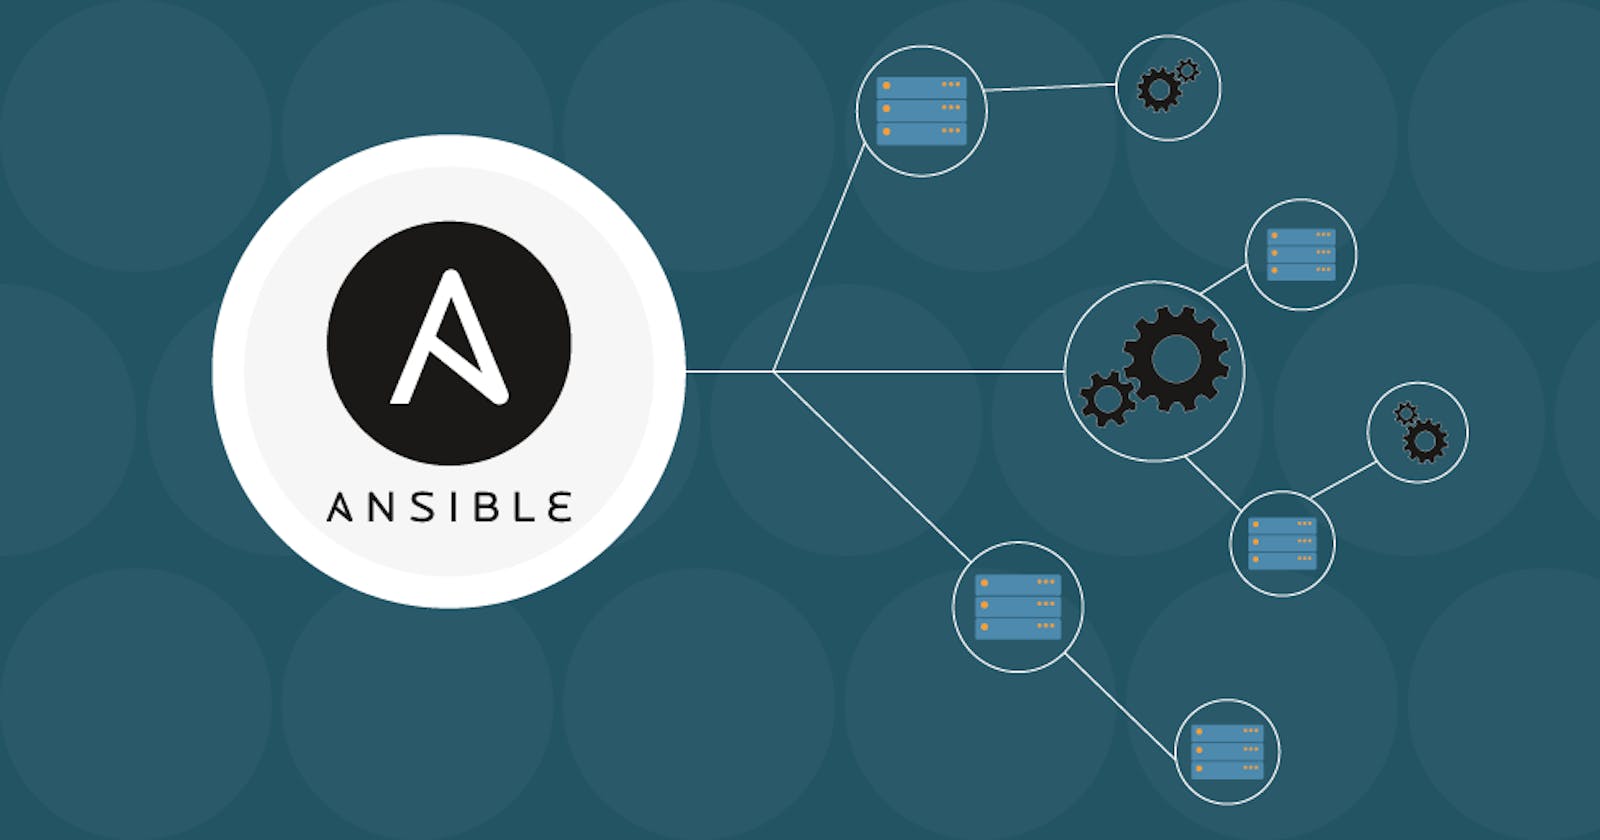 What is Ansible?